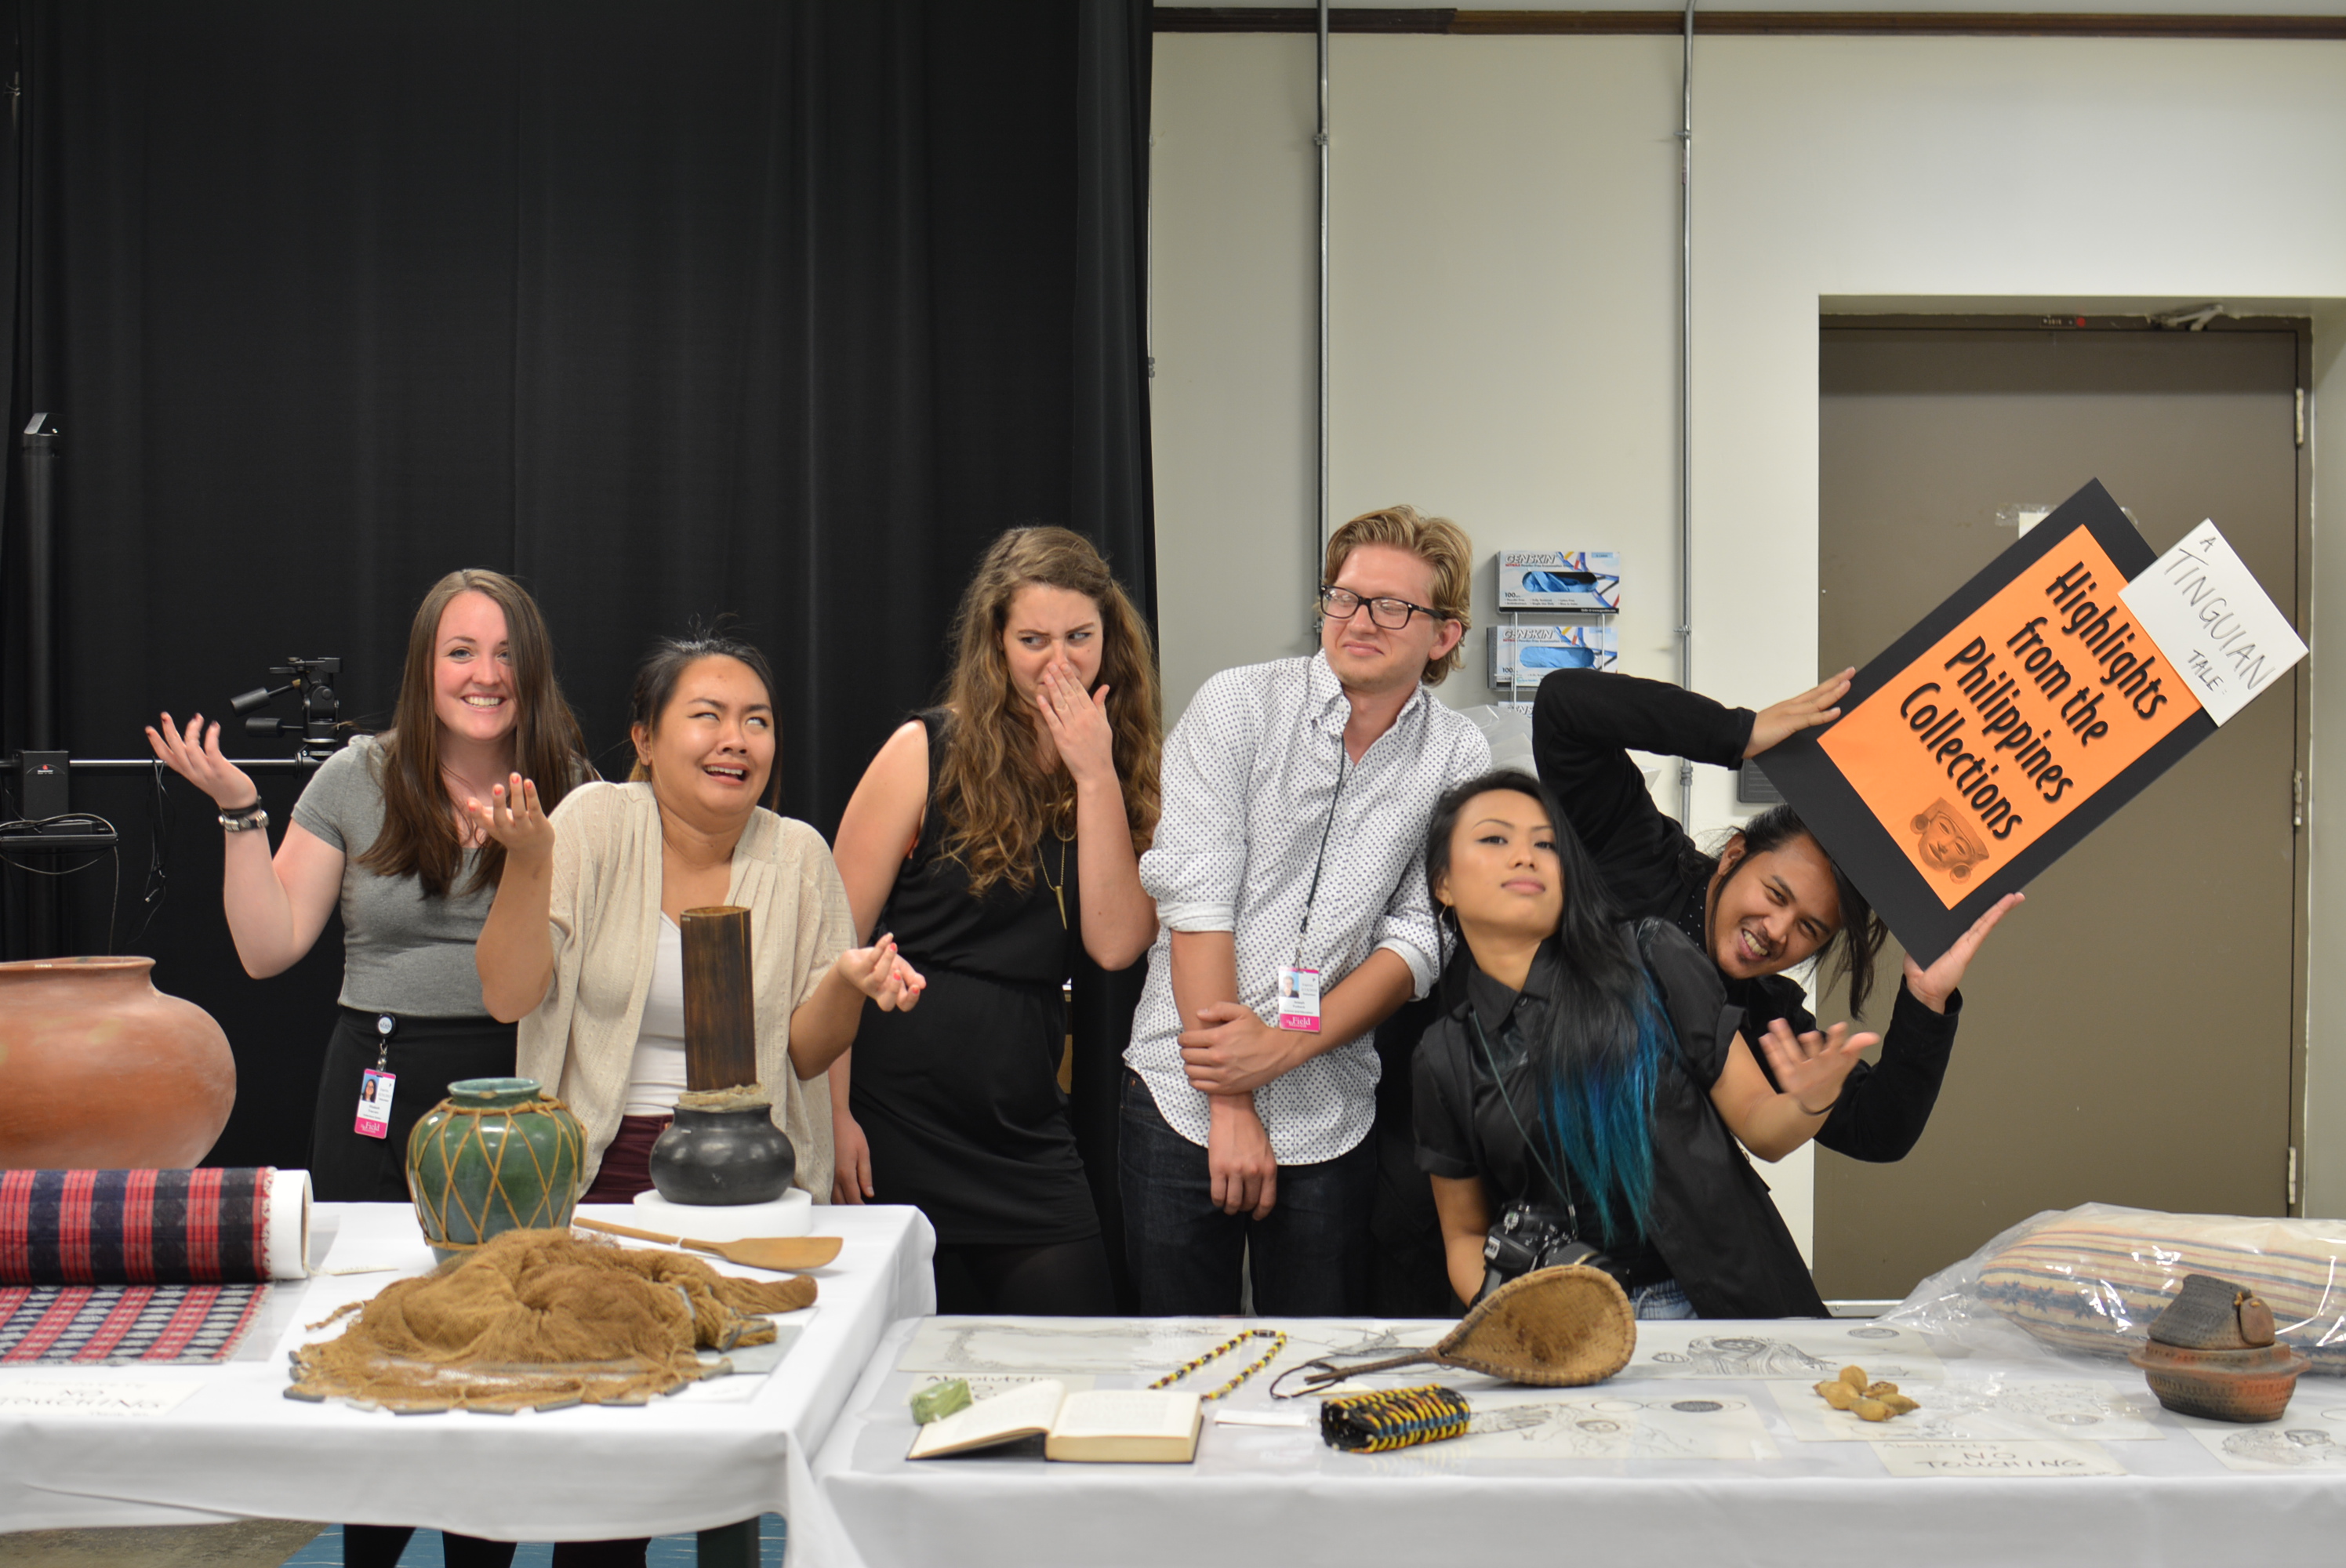 The Digital Co-Curation Team poses for a silly group photo behind their display tables. 